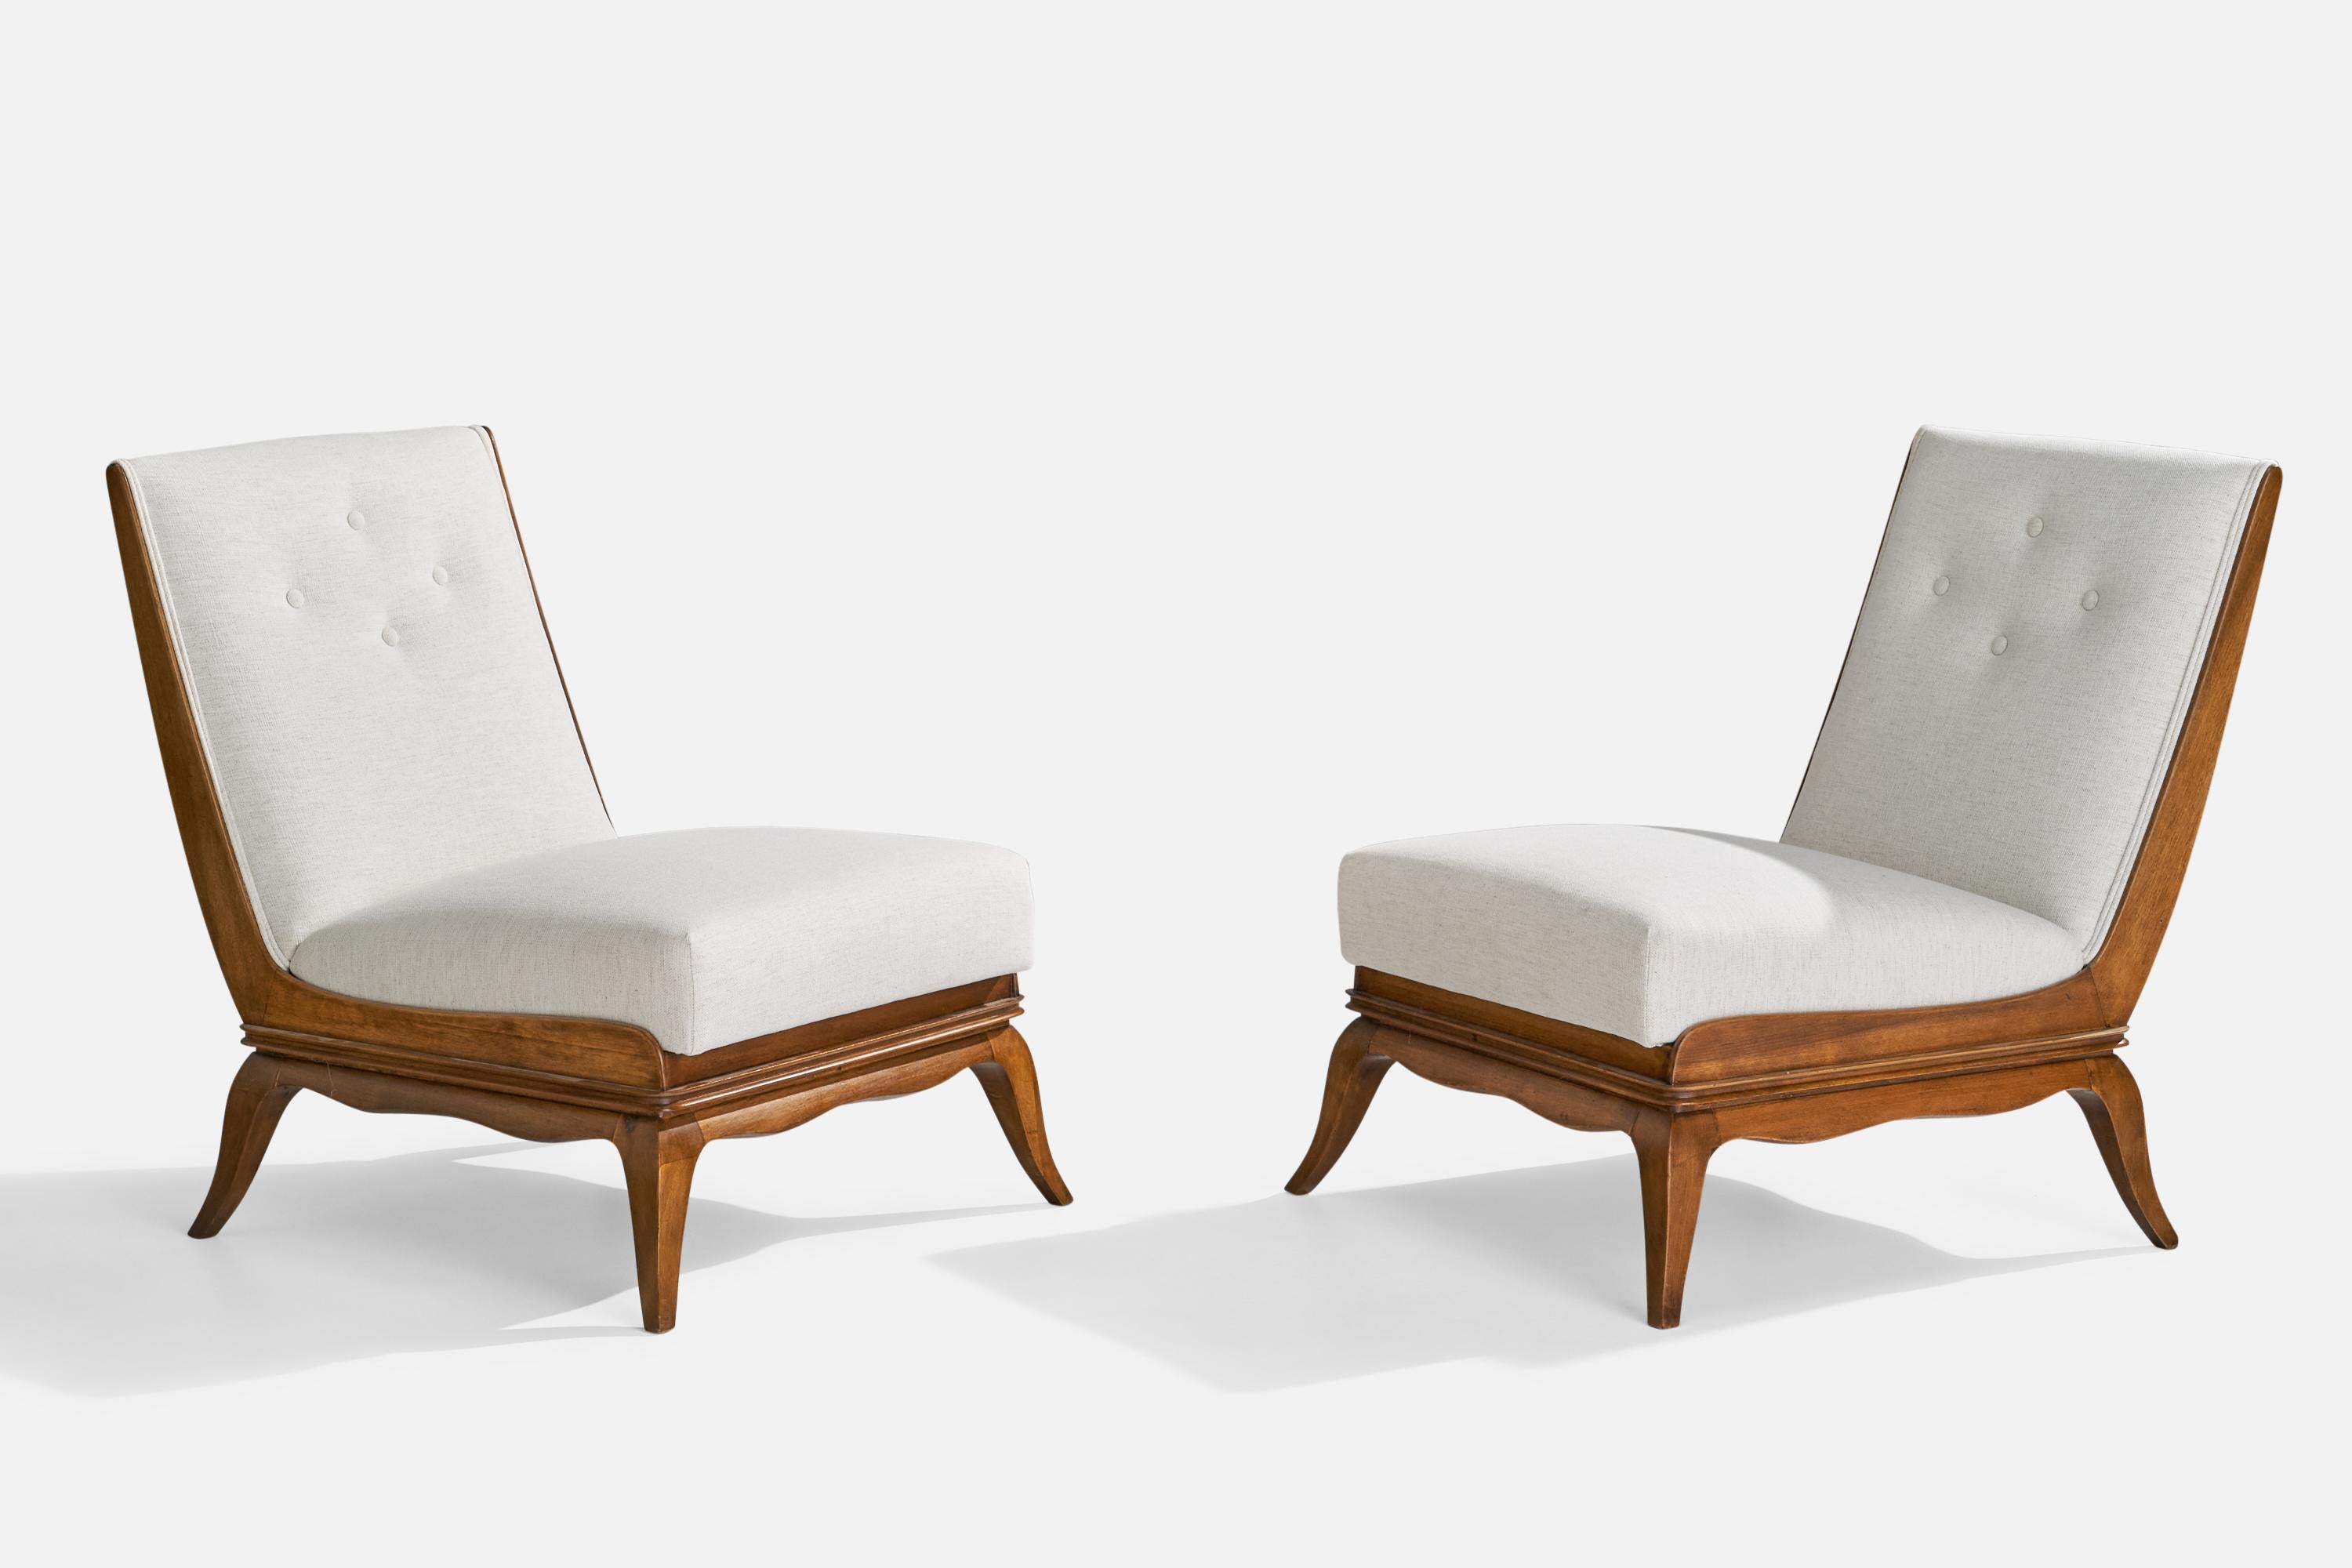 Italian Designer, Slipper Chairs with Ottoman, Walnut, Fabric, Italy, 1940s For Sale 3